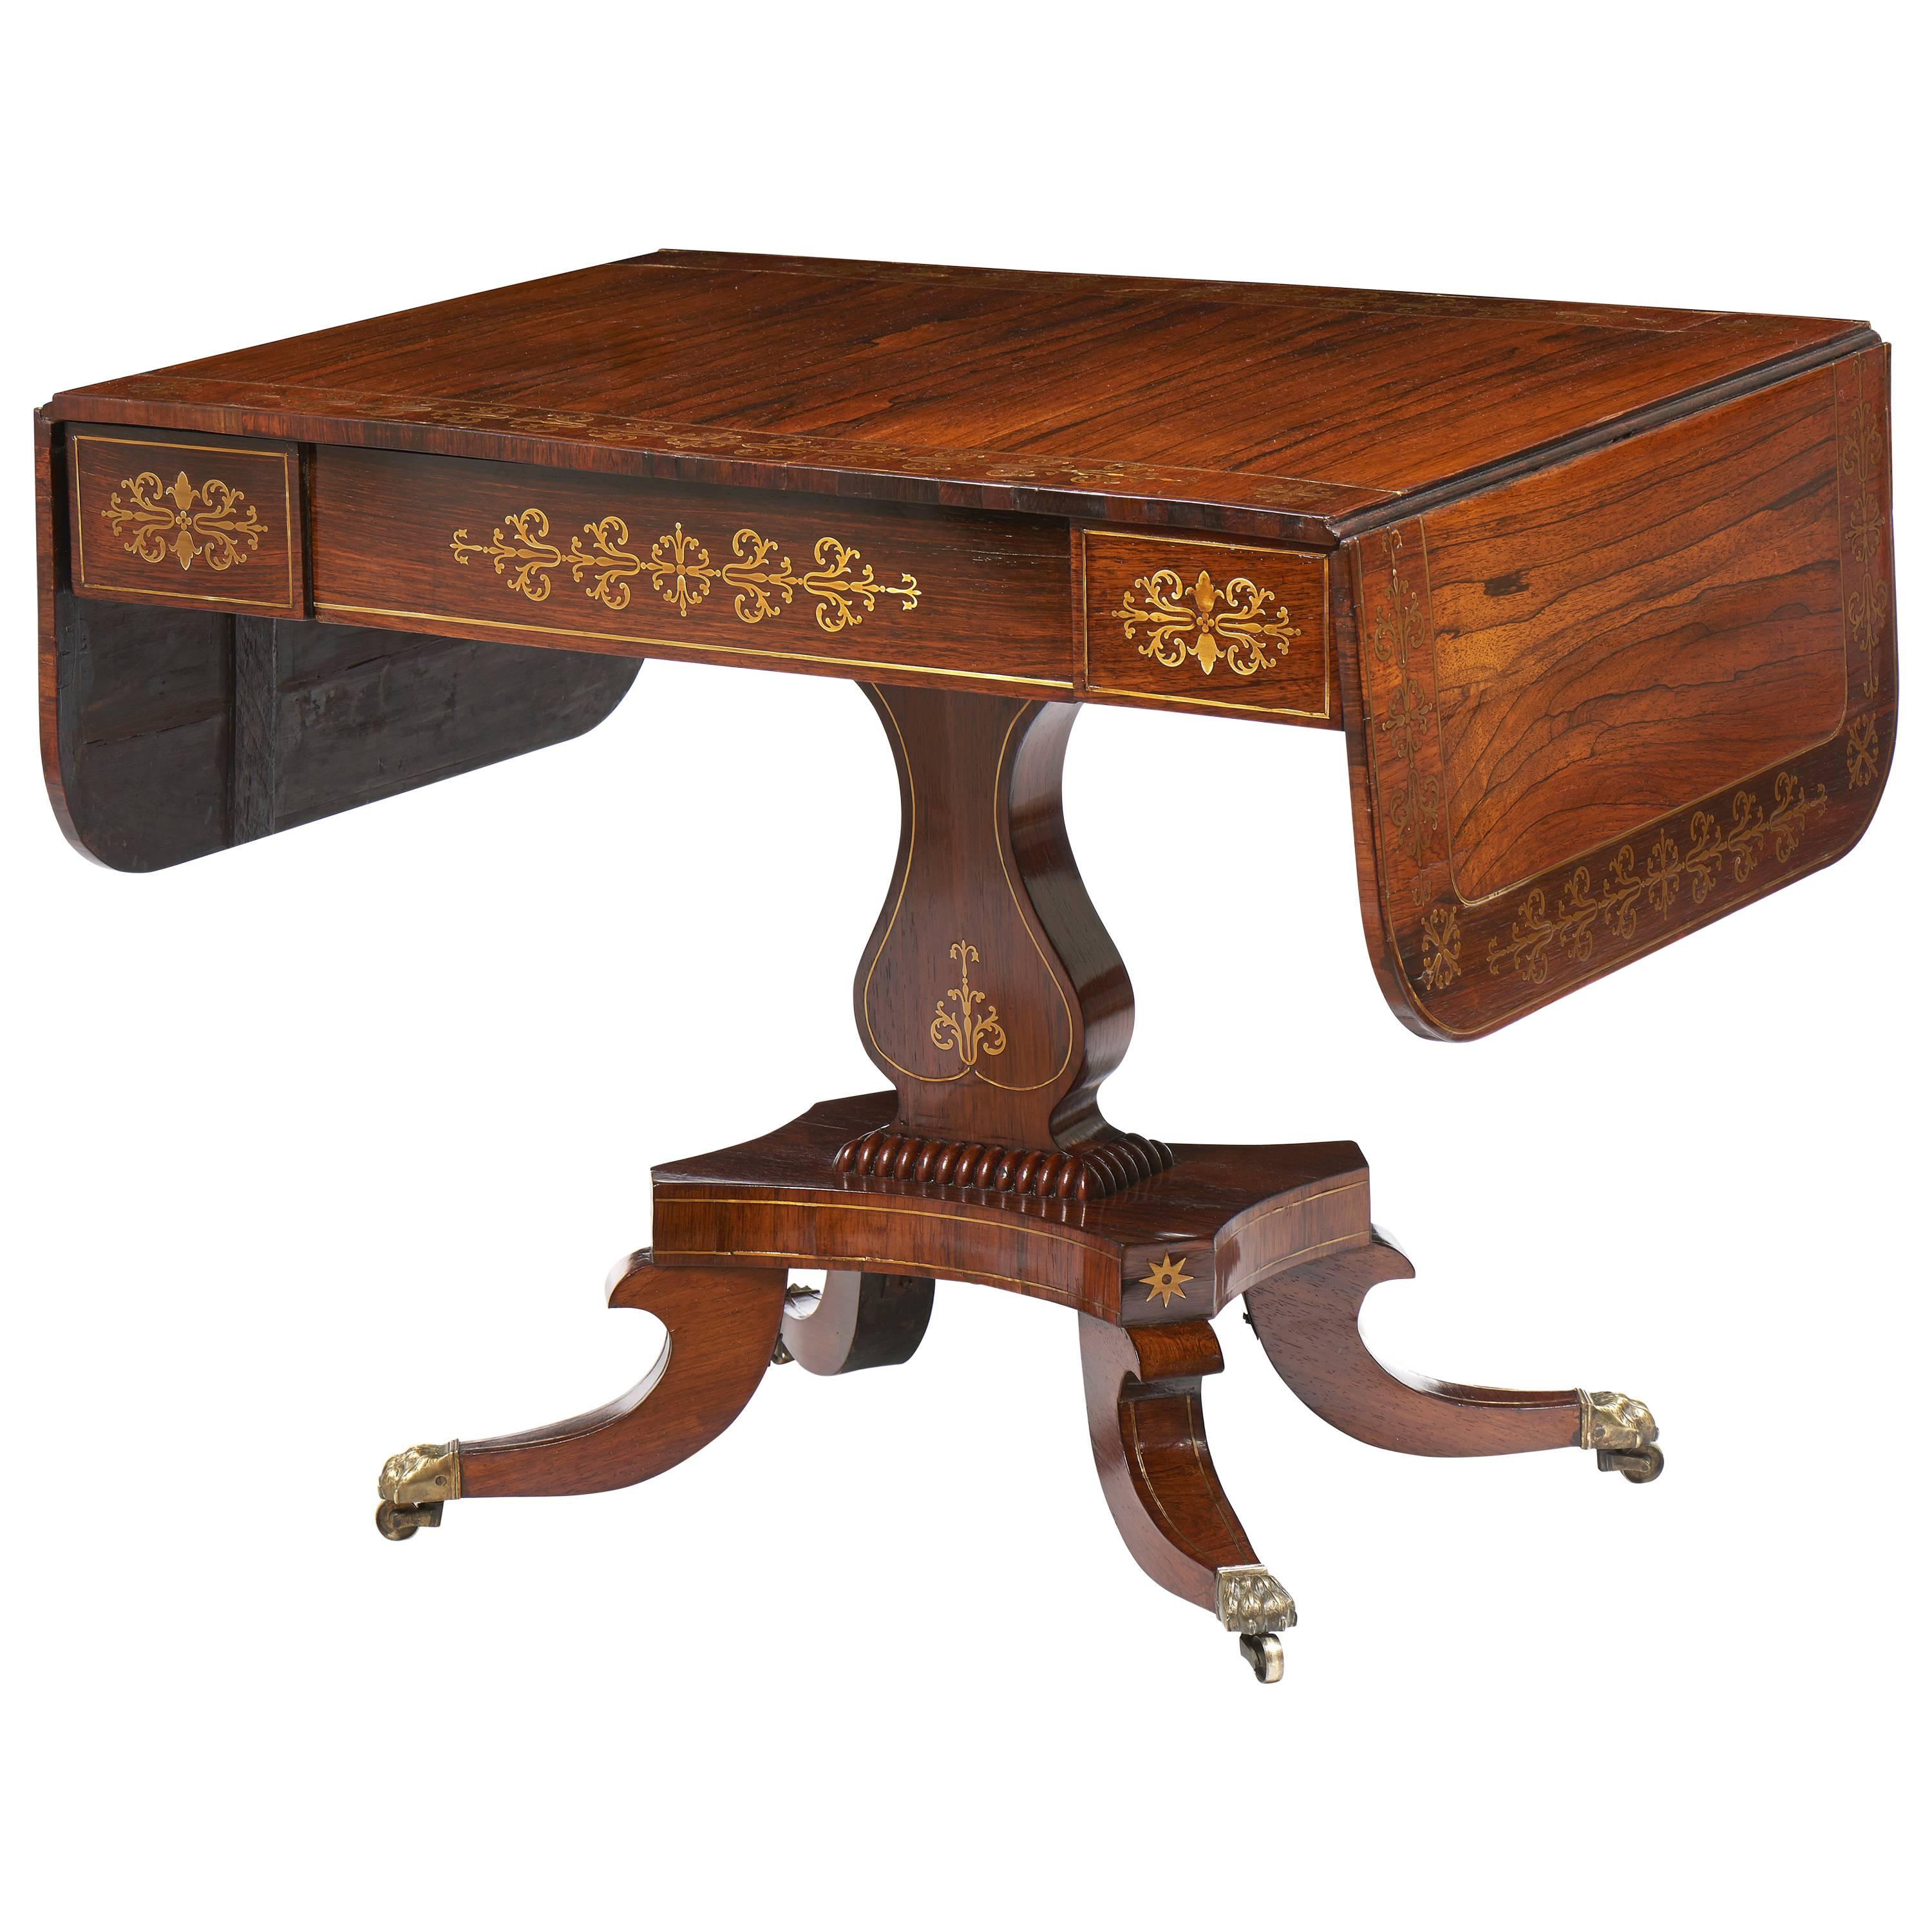 English Regency Rosewood Brass Inlaid Sofa Table Early 19th Century For Sale